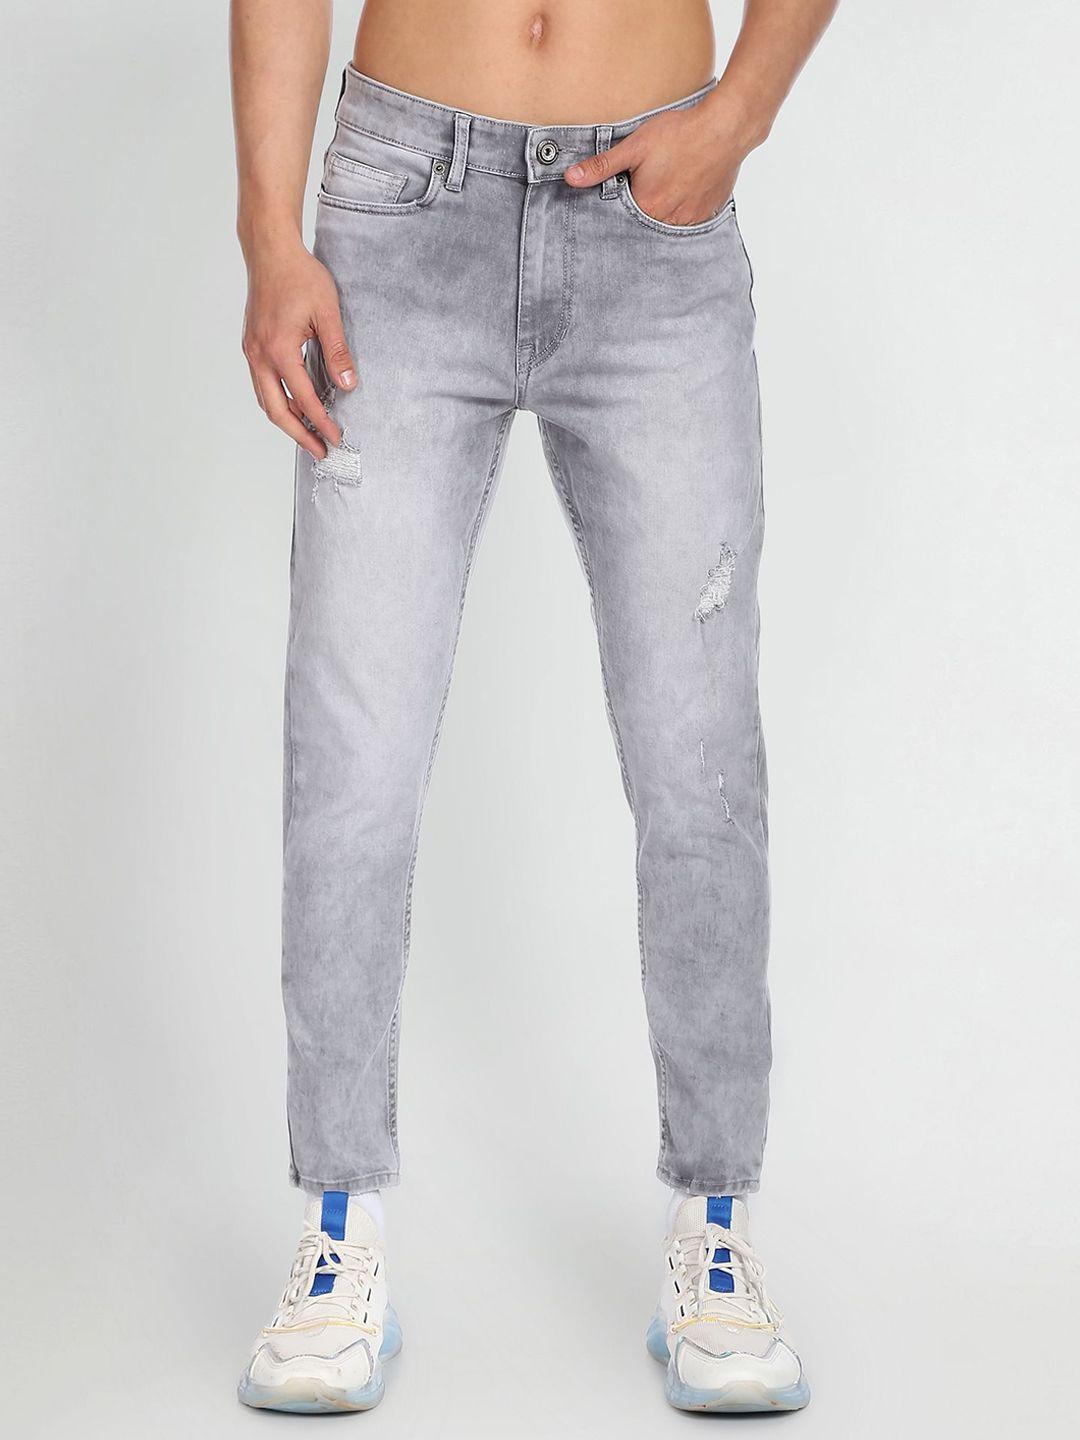 flying-machine-men-slim-fit-mildly-distressed-heavy-fade-whiskers-jeans